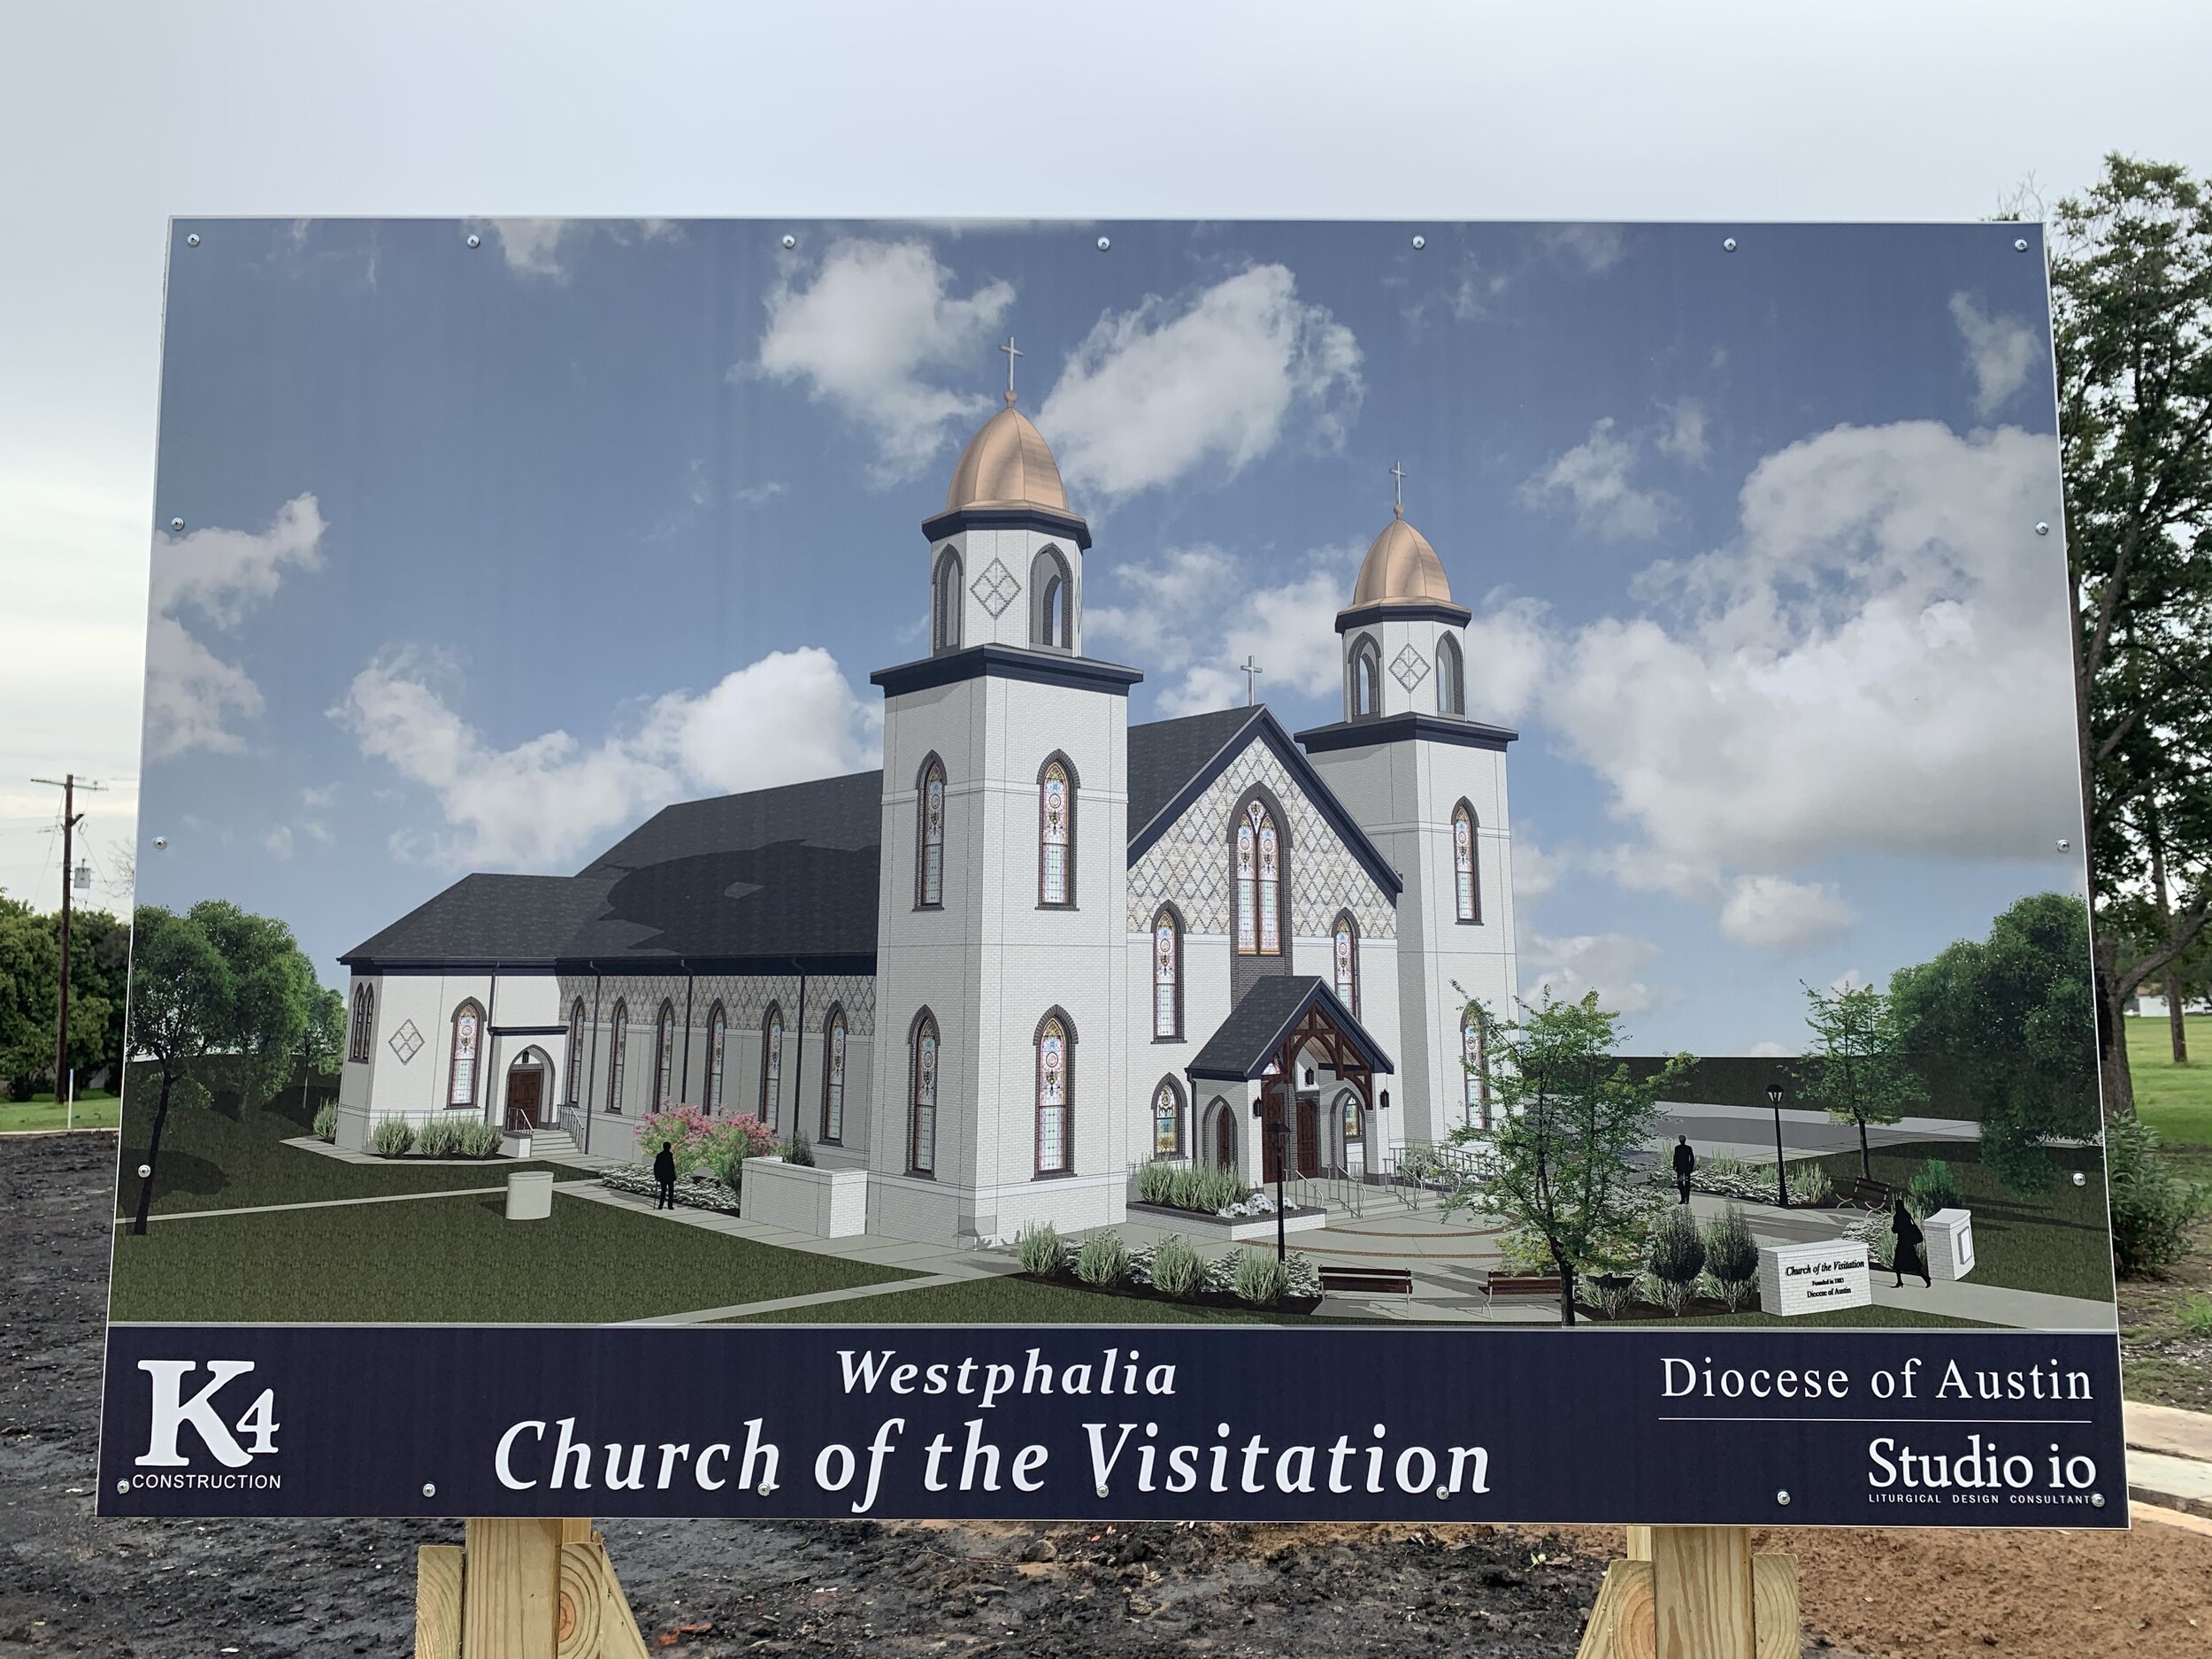  Plans for the new church – a collaboration between Design/Build Contractor and Architect of Record K4 and Studio io – largely honor the prior church with a variety of functional, code-required, and aesthetic upgrades. 